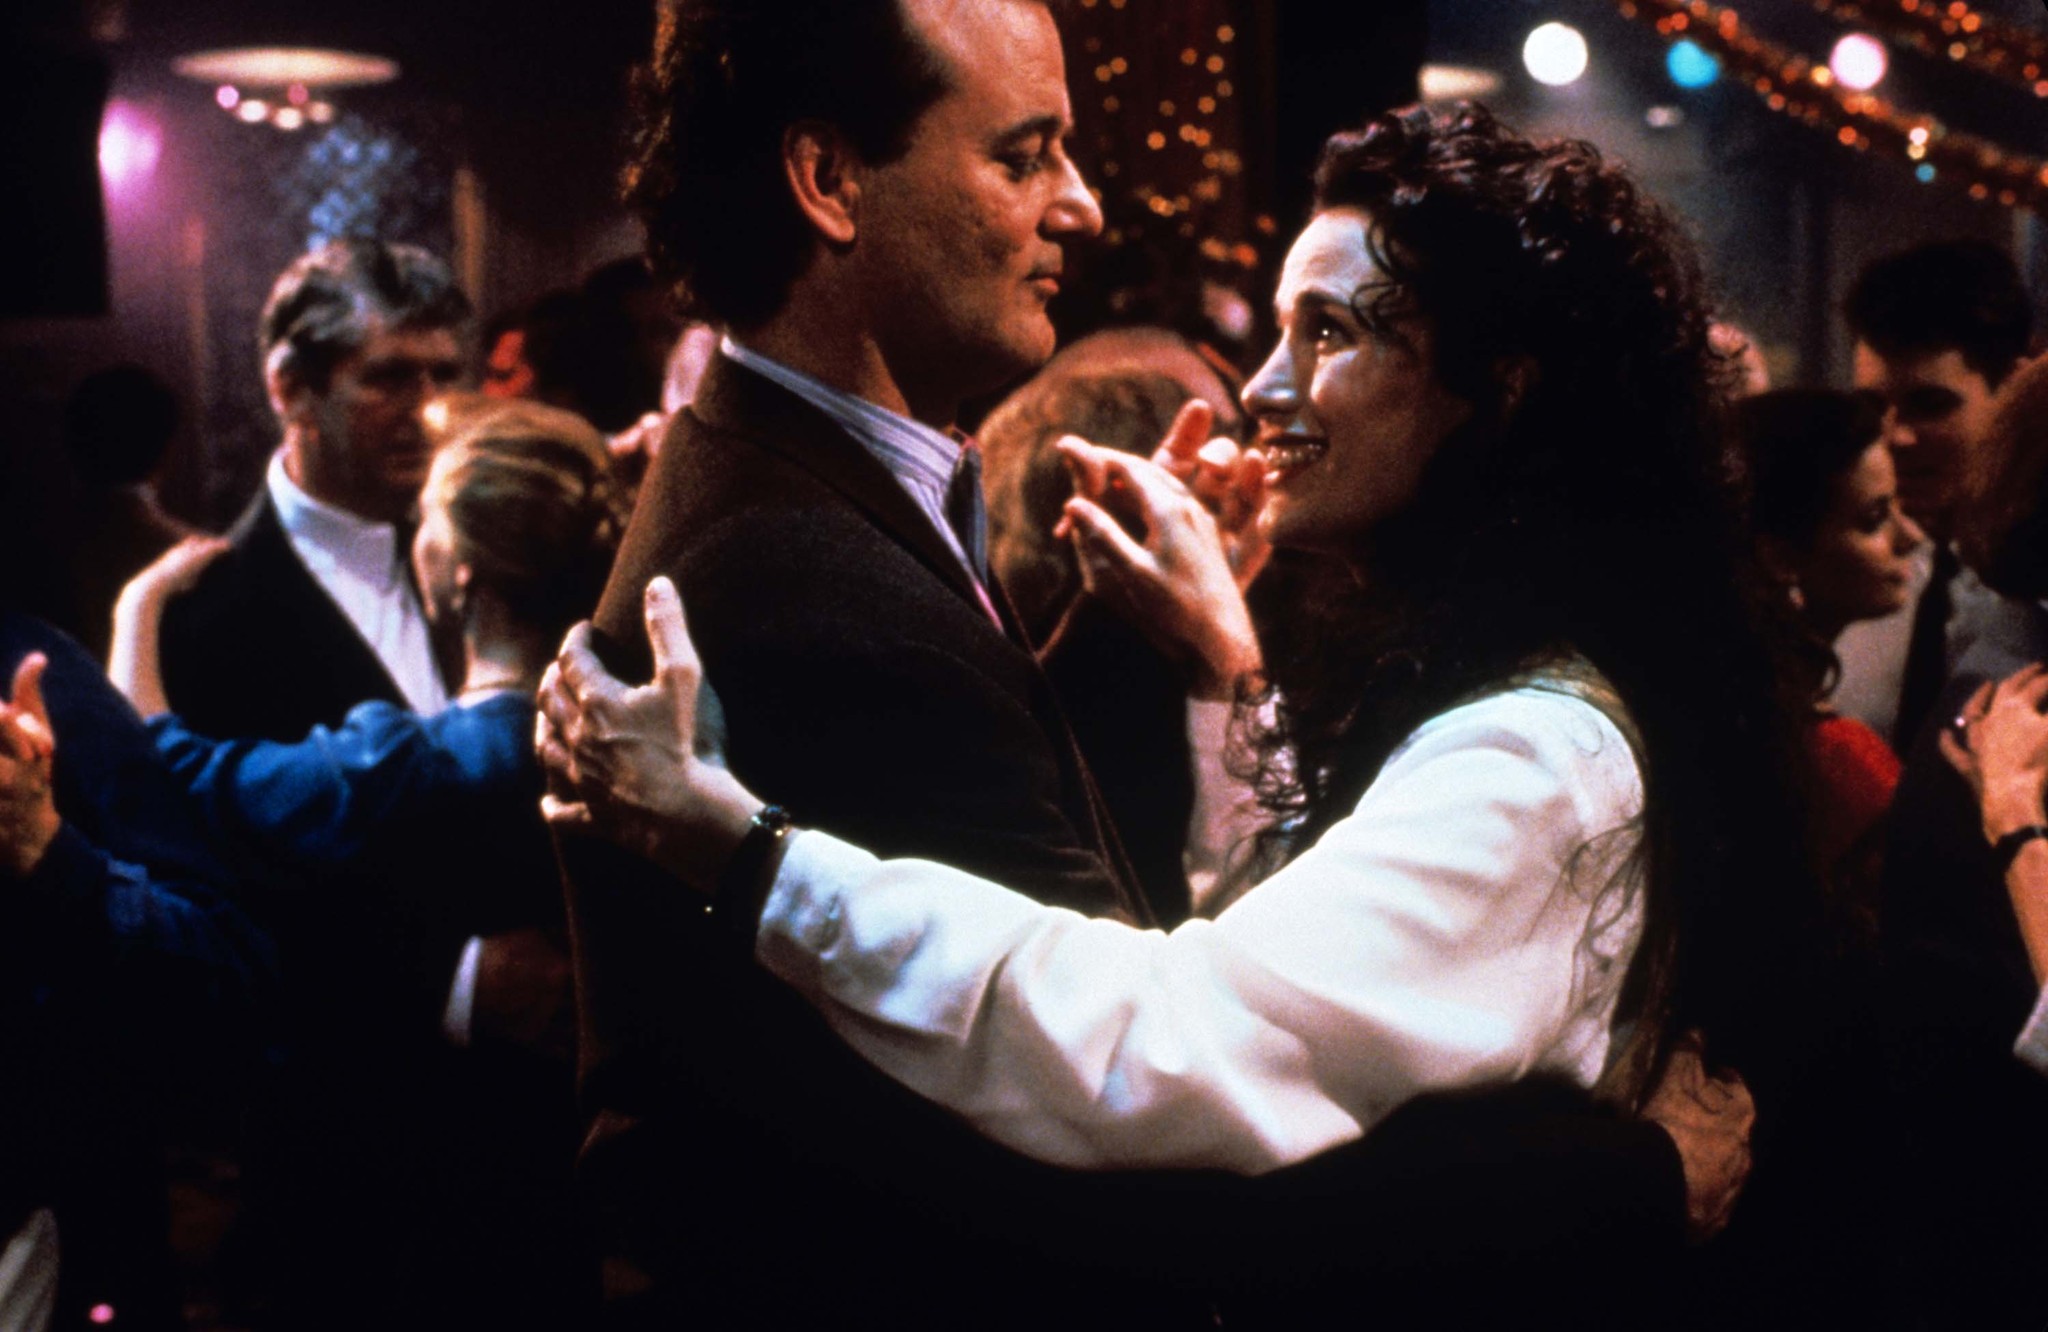 Still of Bill Murray and Andie MacDowell in Svilpiko diena (1993)